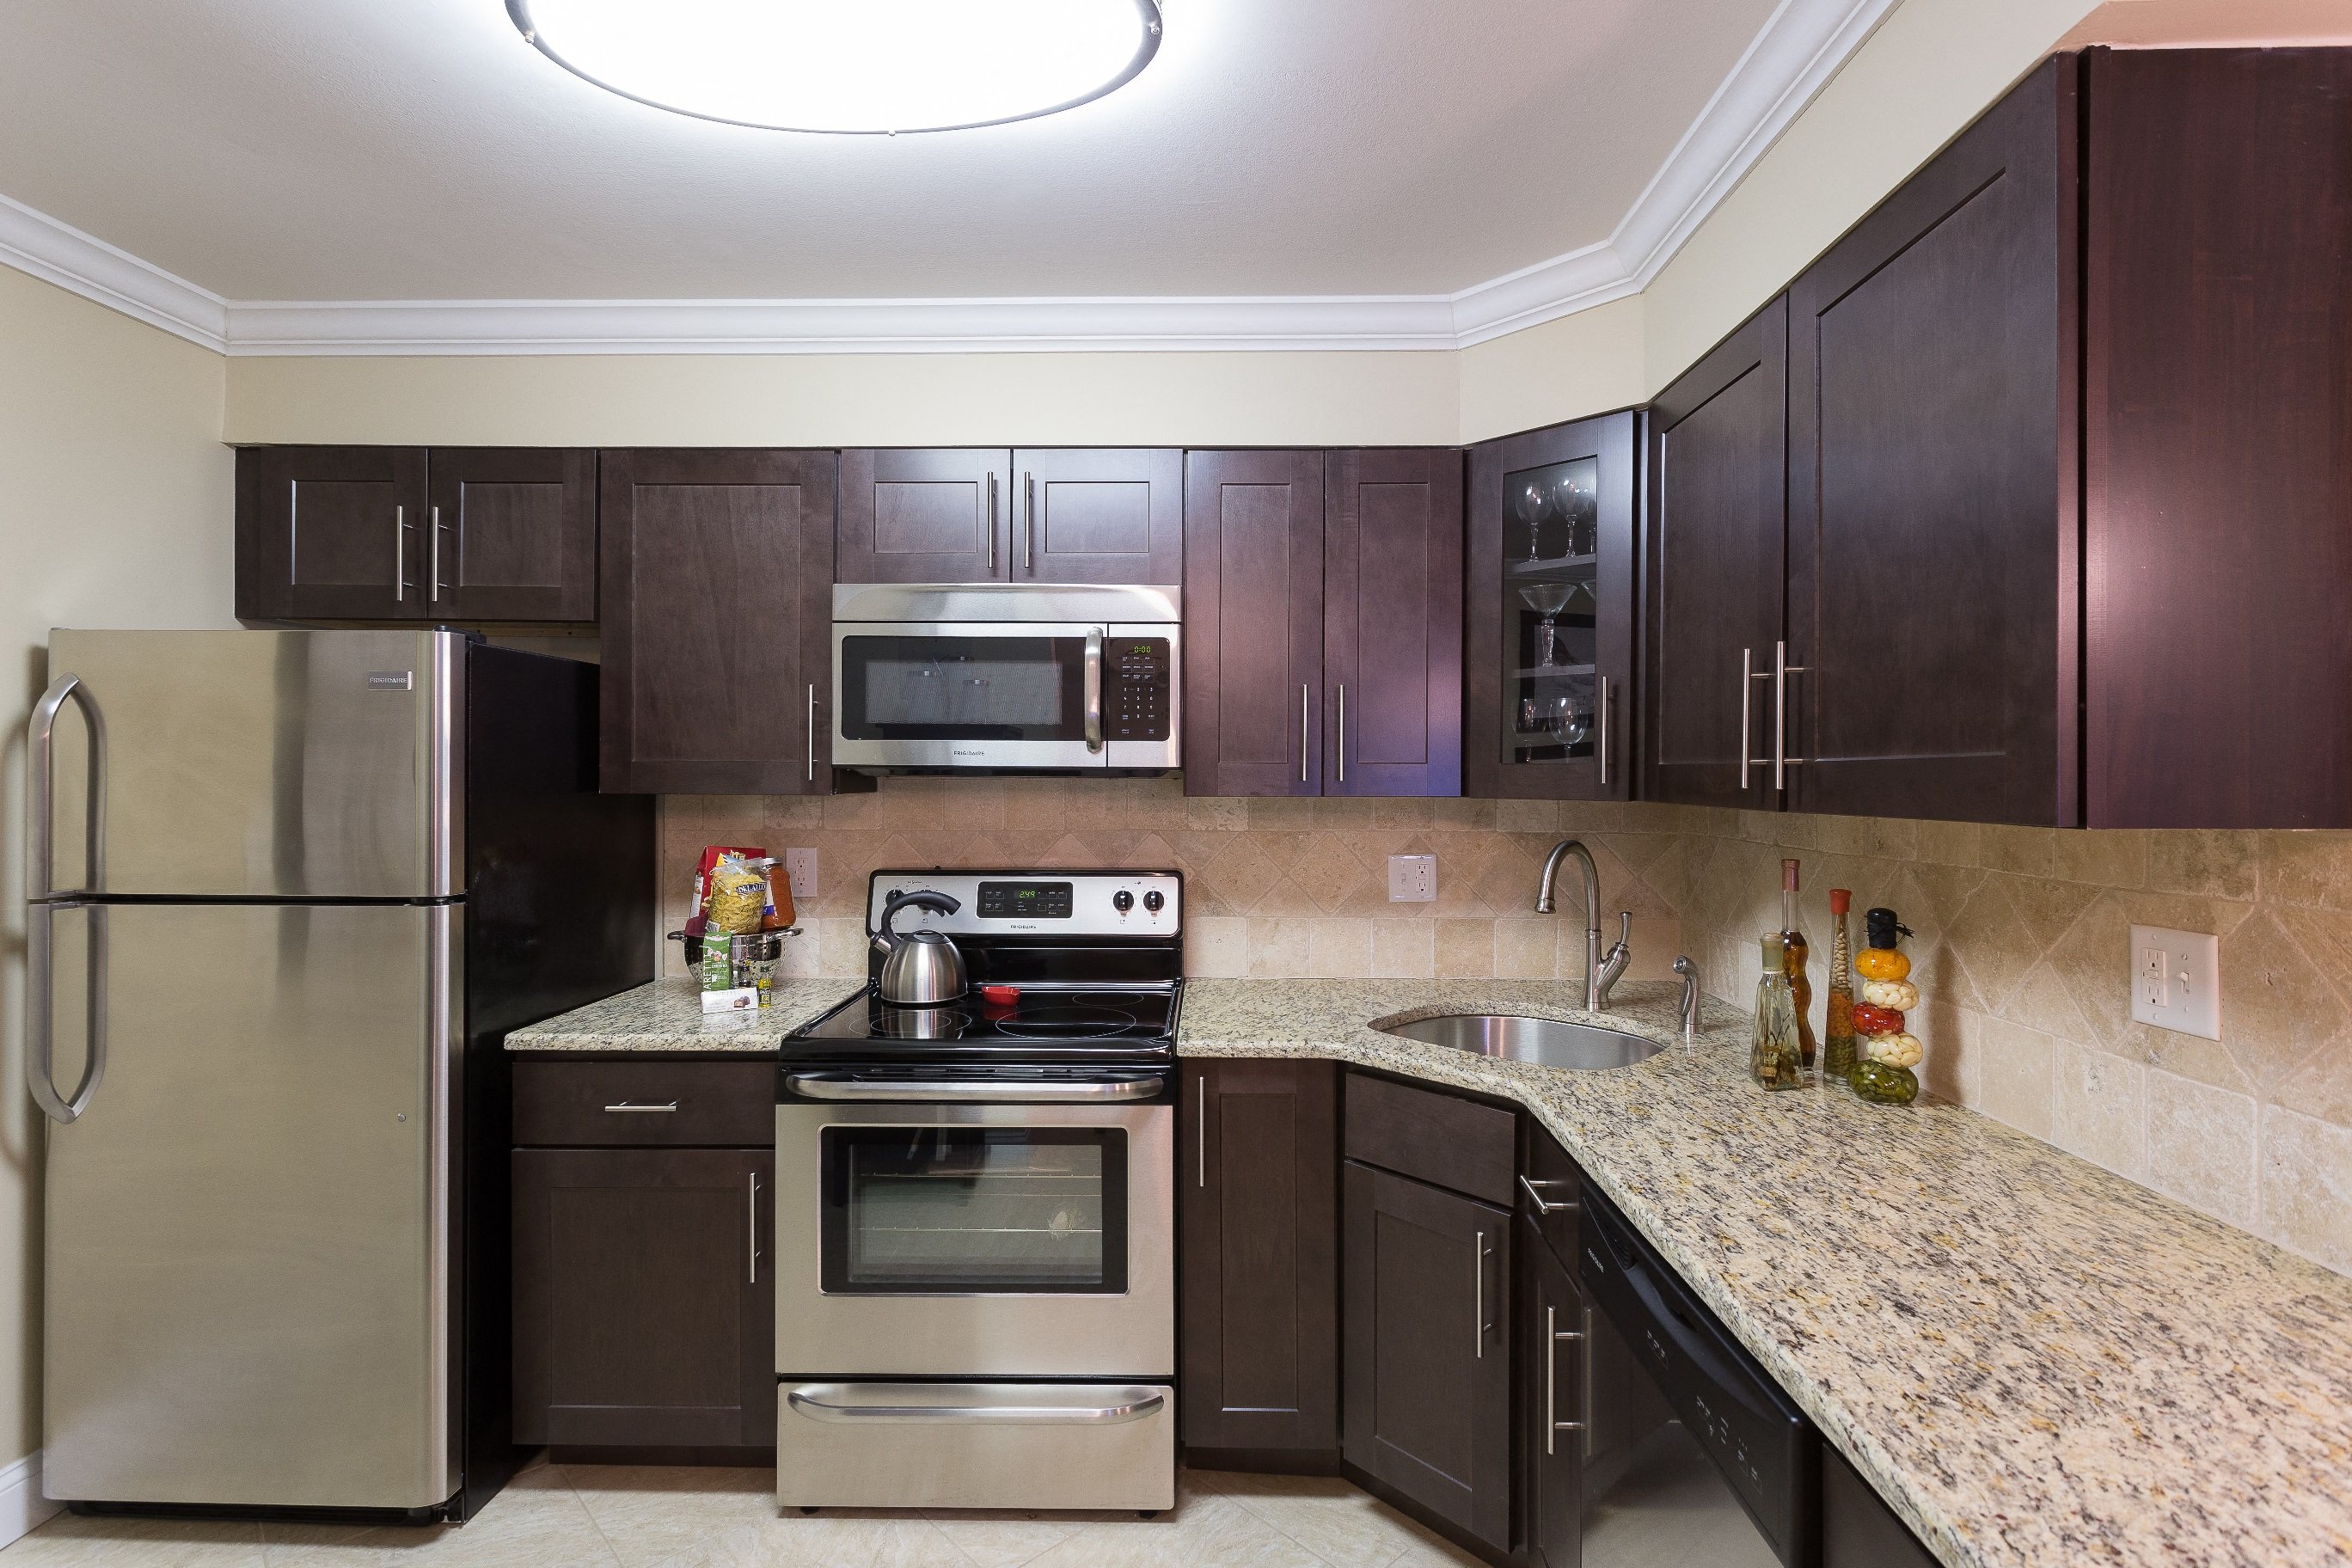 Kitchen with silver appliances, granite counter tops, and tile backslash